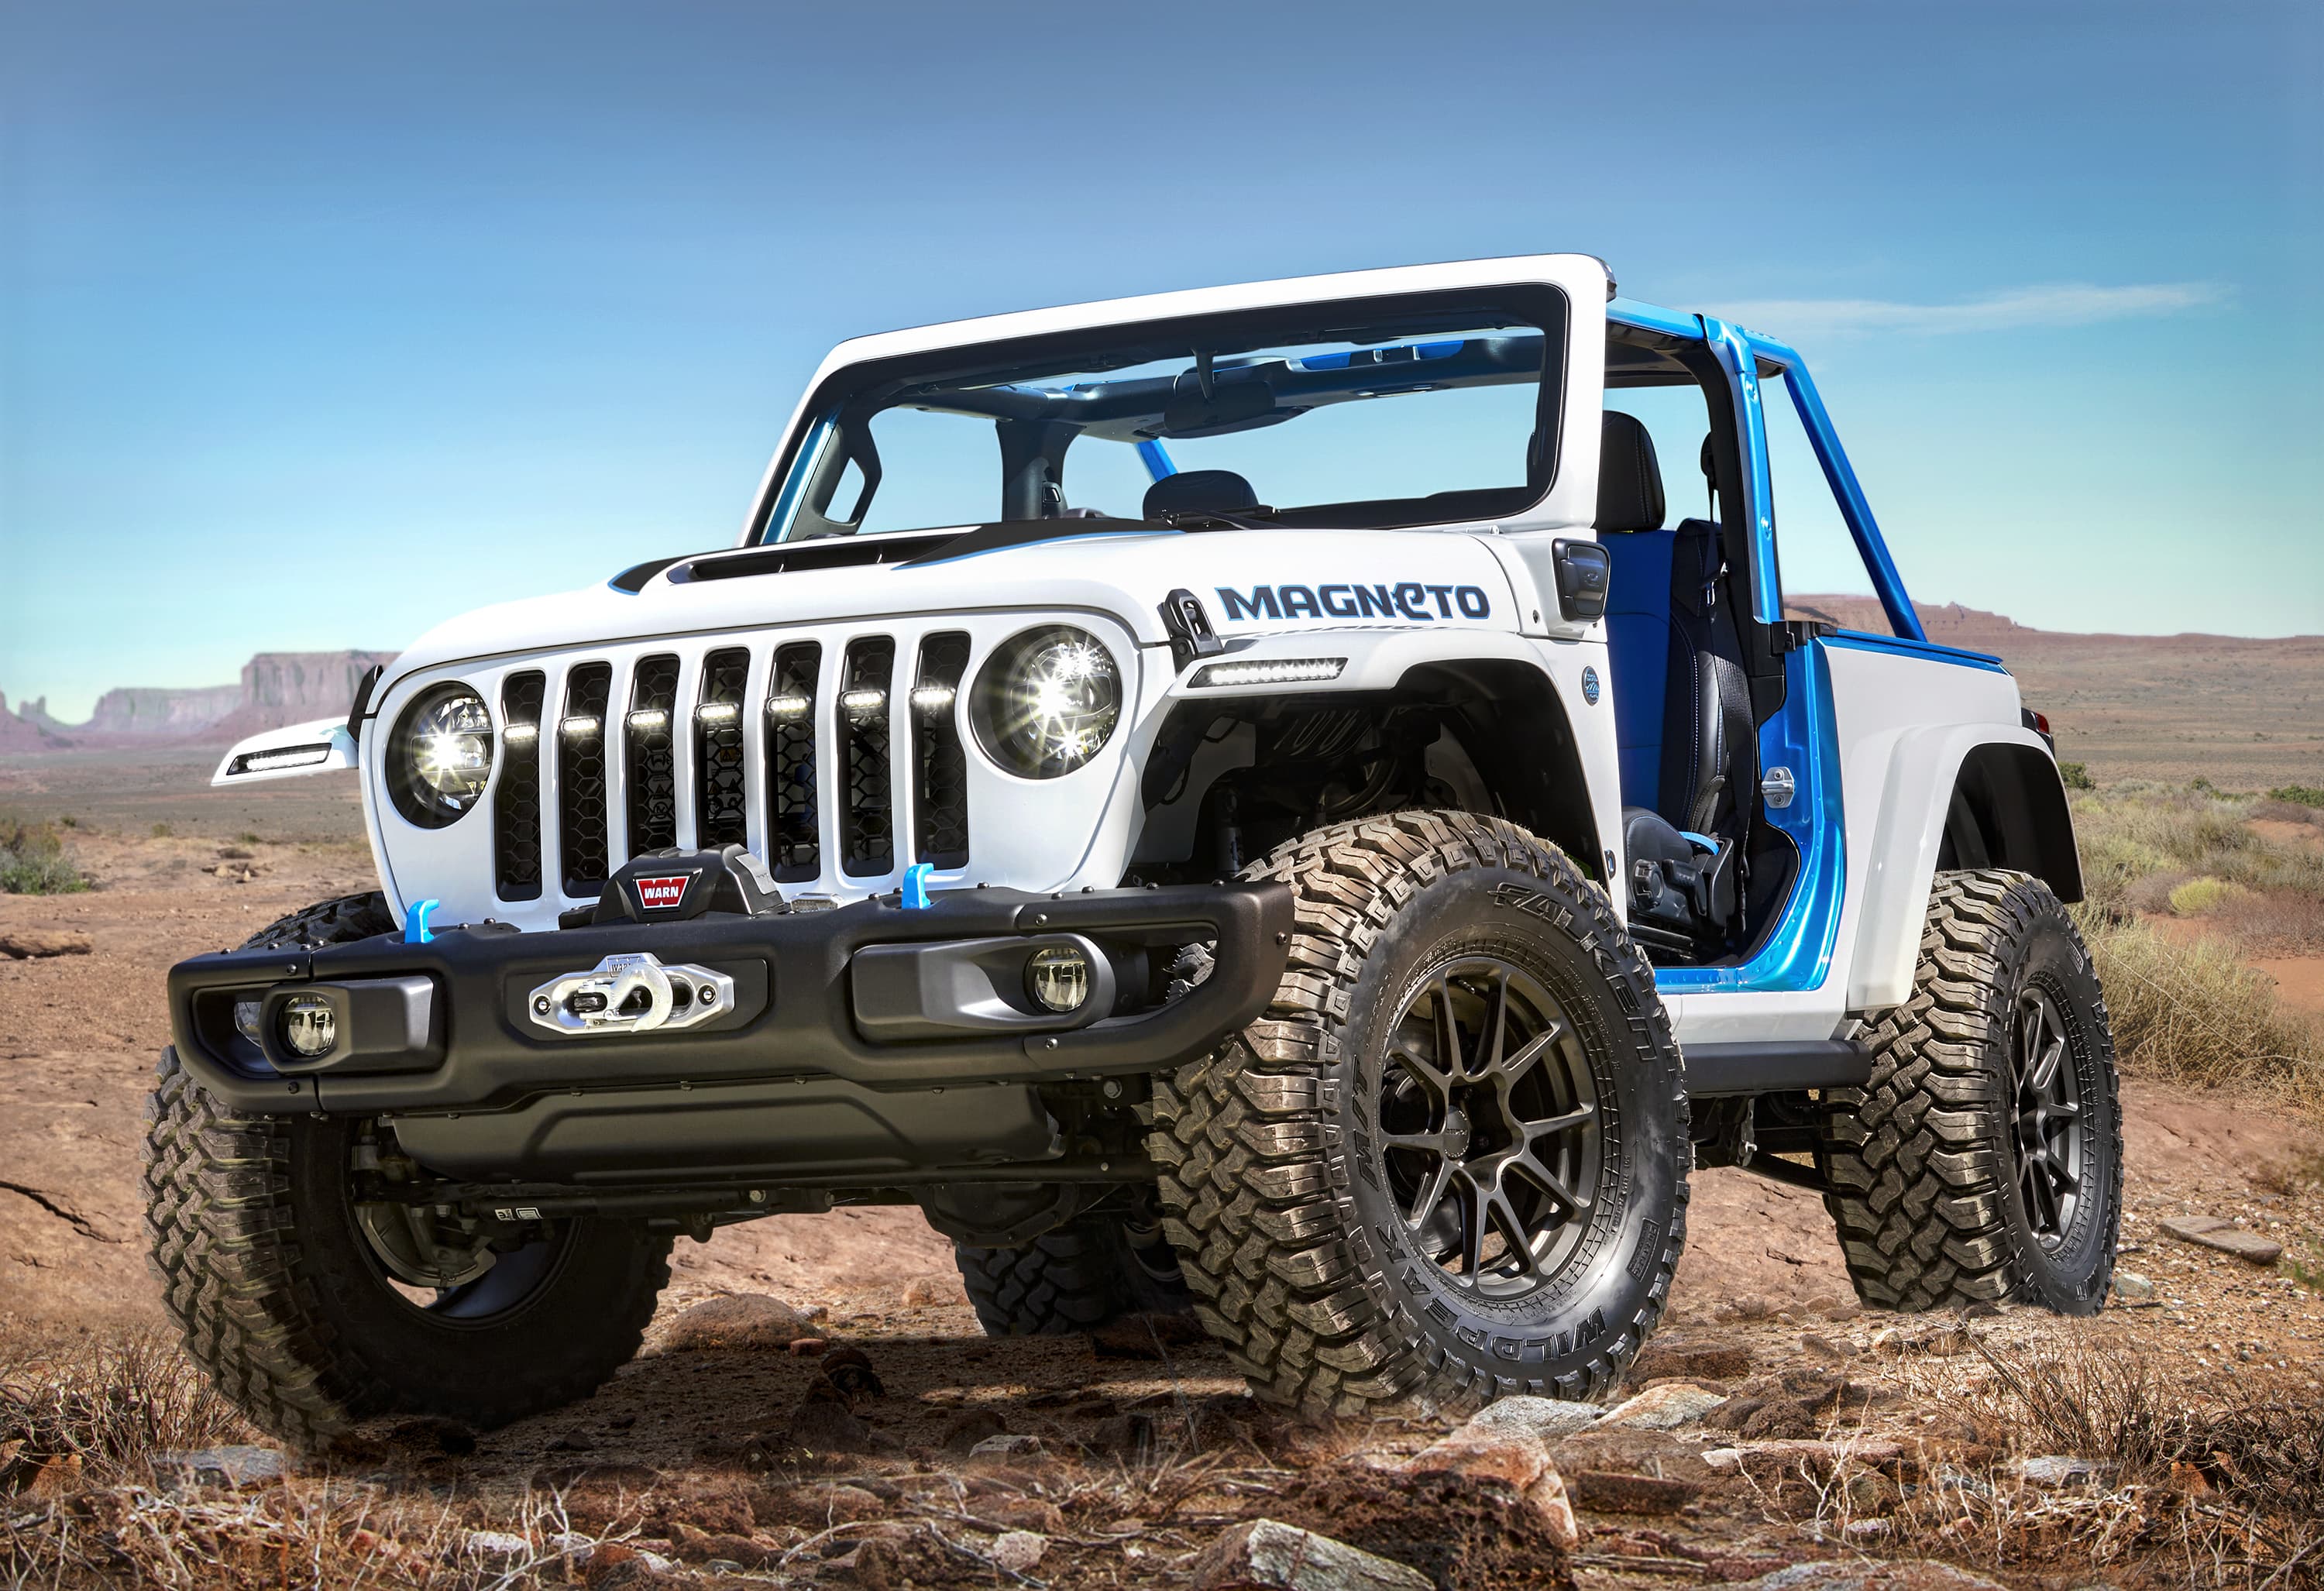 Jeep unveils all-electric SUV of the Wrangler concept